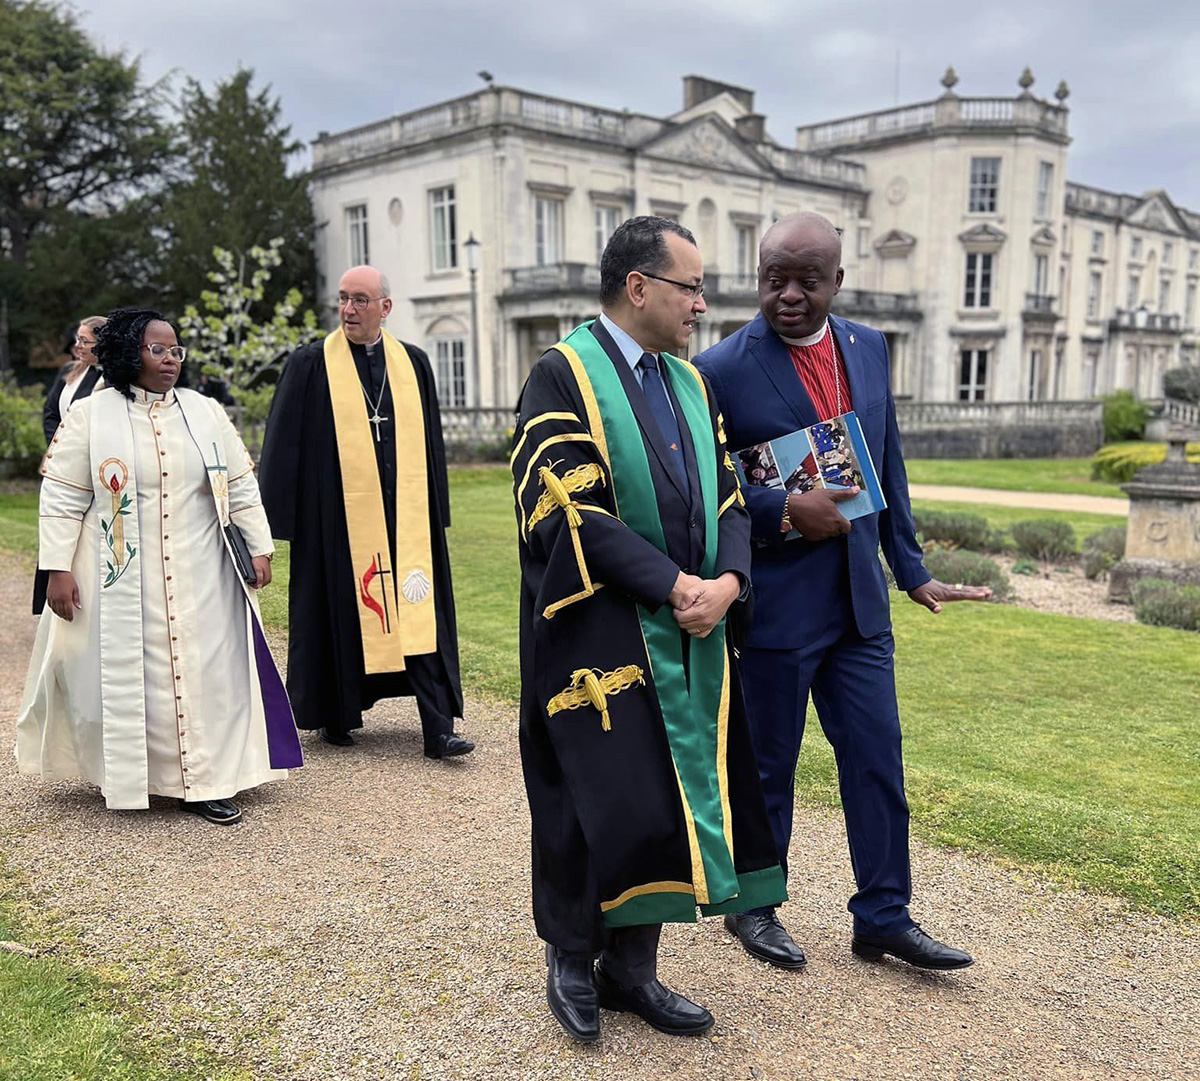 (From left) Bishop Pumla Nzimande, the Methodist Church of Southern Africa; the Rev. Graham Thompson, president of the Methodist Conference 2022/2023 in Britain; Amos Nascimento, United Methodist General Board of Higher Education and Ministry; and United Methodist Bishop Mande Muyombo, resident bishop of the North Katanga Area, join in a procession at the University of Roehampton, London, England, during the 10th joint international conference of the International Association of Methodist Schools, Colleges and Universities in Great Britain, April 25-May 1. Photo by Kimberly Lord, the United Methodist Board of Higher Education and Ministry.